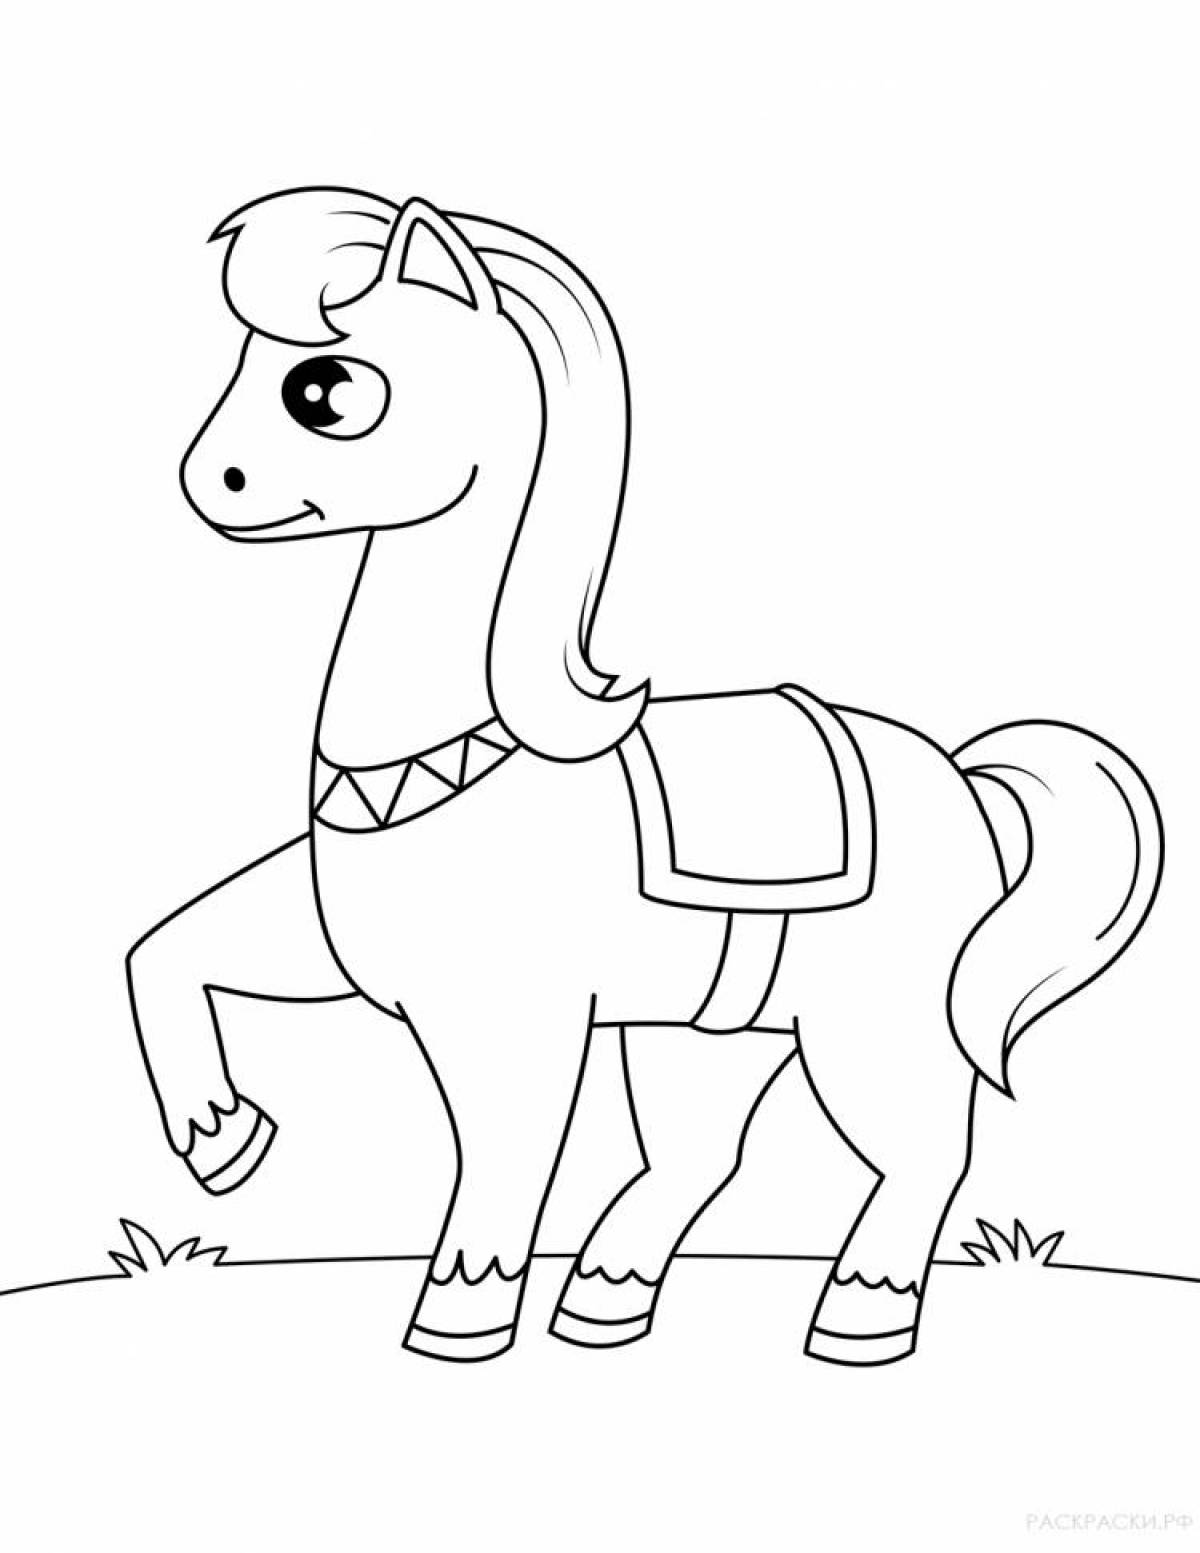 Friesian galloping horse coloring book for kids